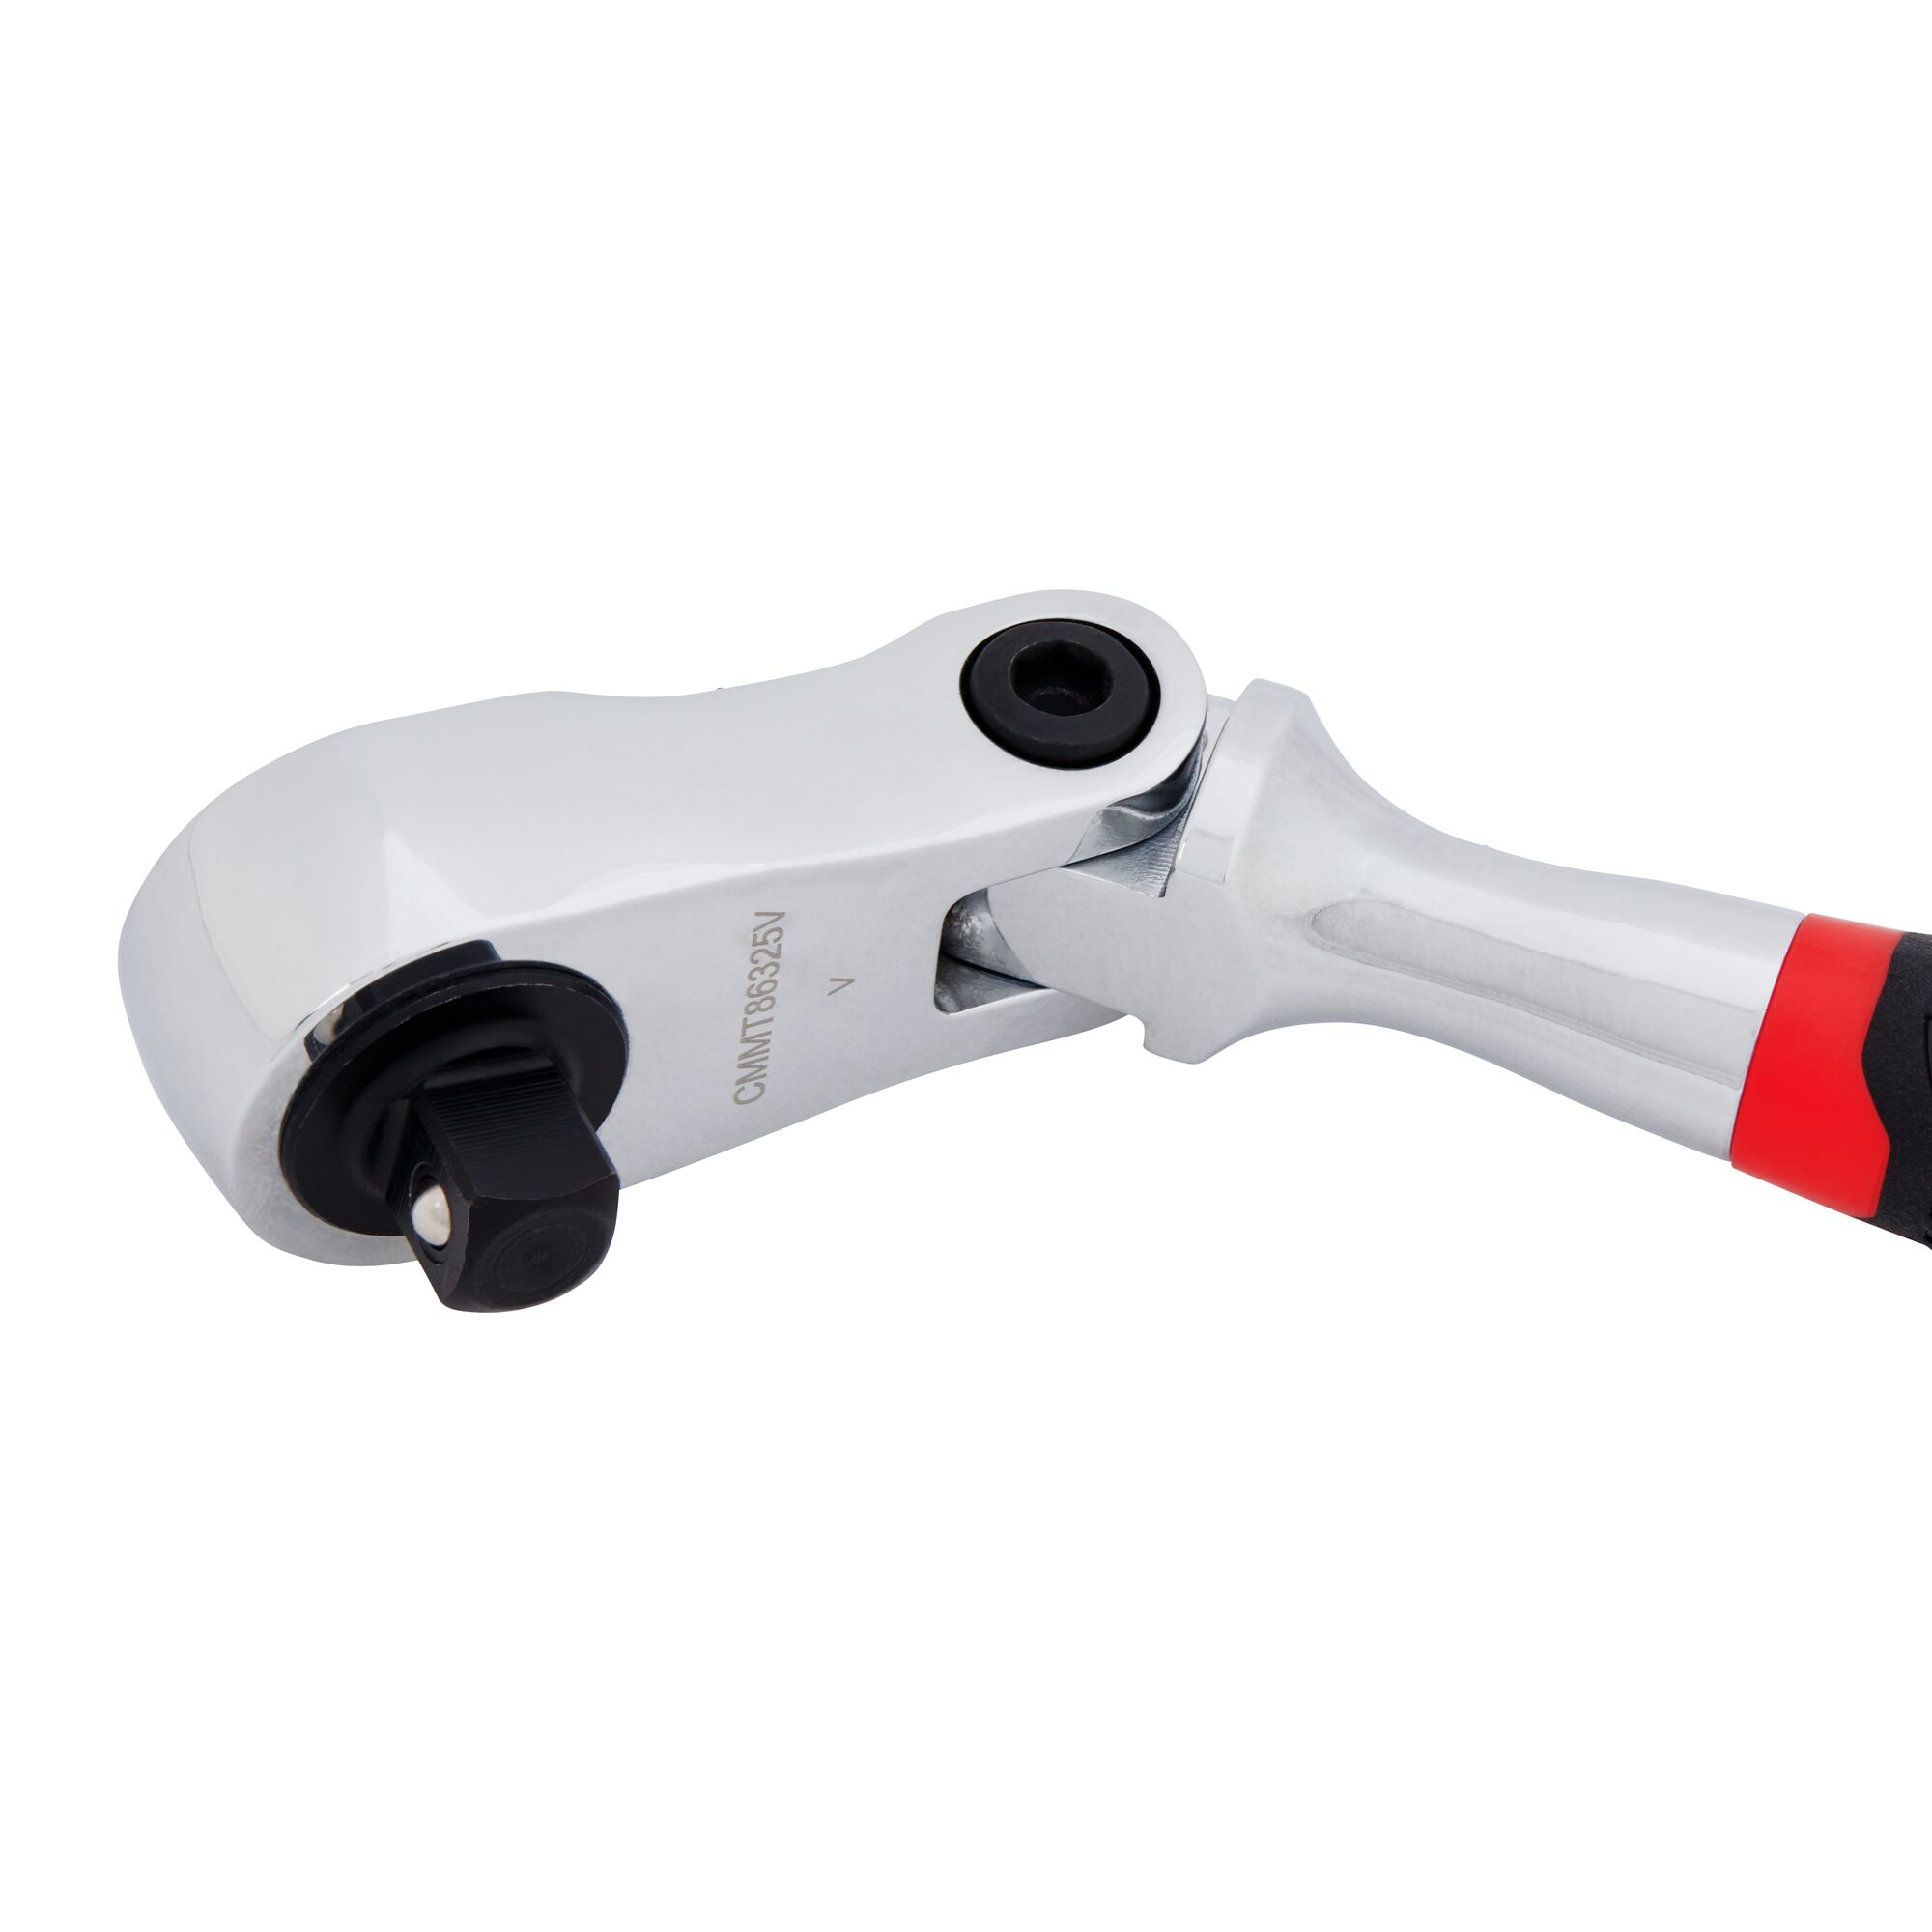 180 degrees articulating head feature in V series three eighth inch drive comfort grip flex head ratchet.